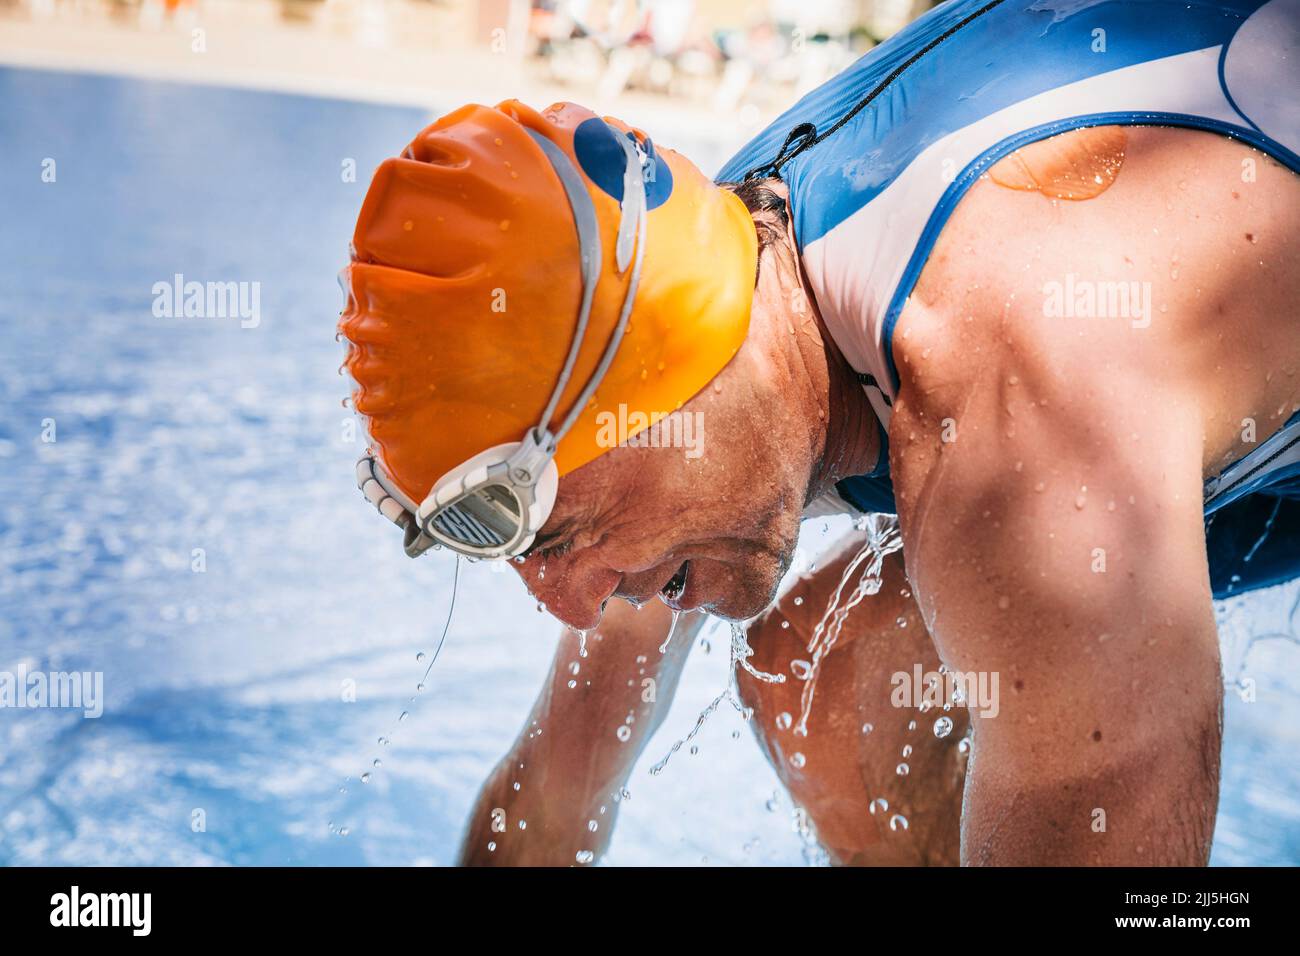 Spain, Mallorca, Sa Coma, triathlet swimmer getting out of pool Stock Photo